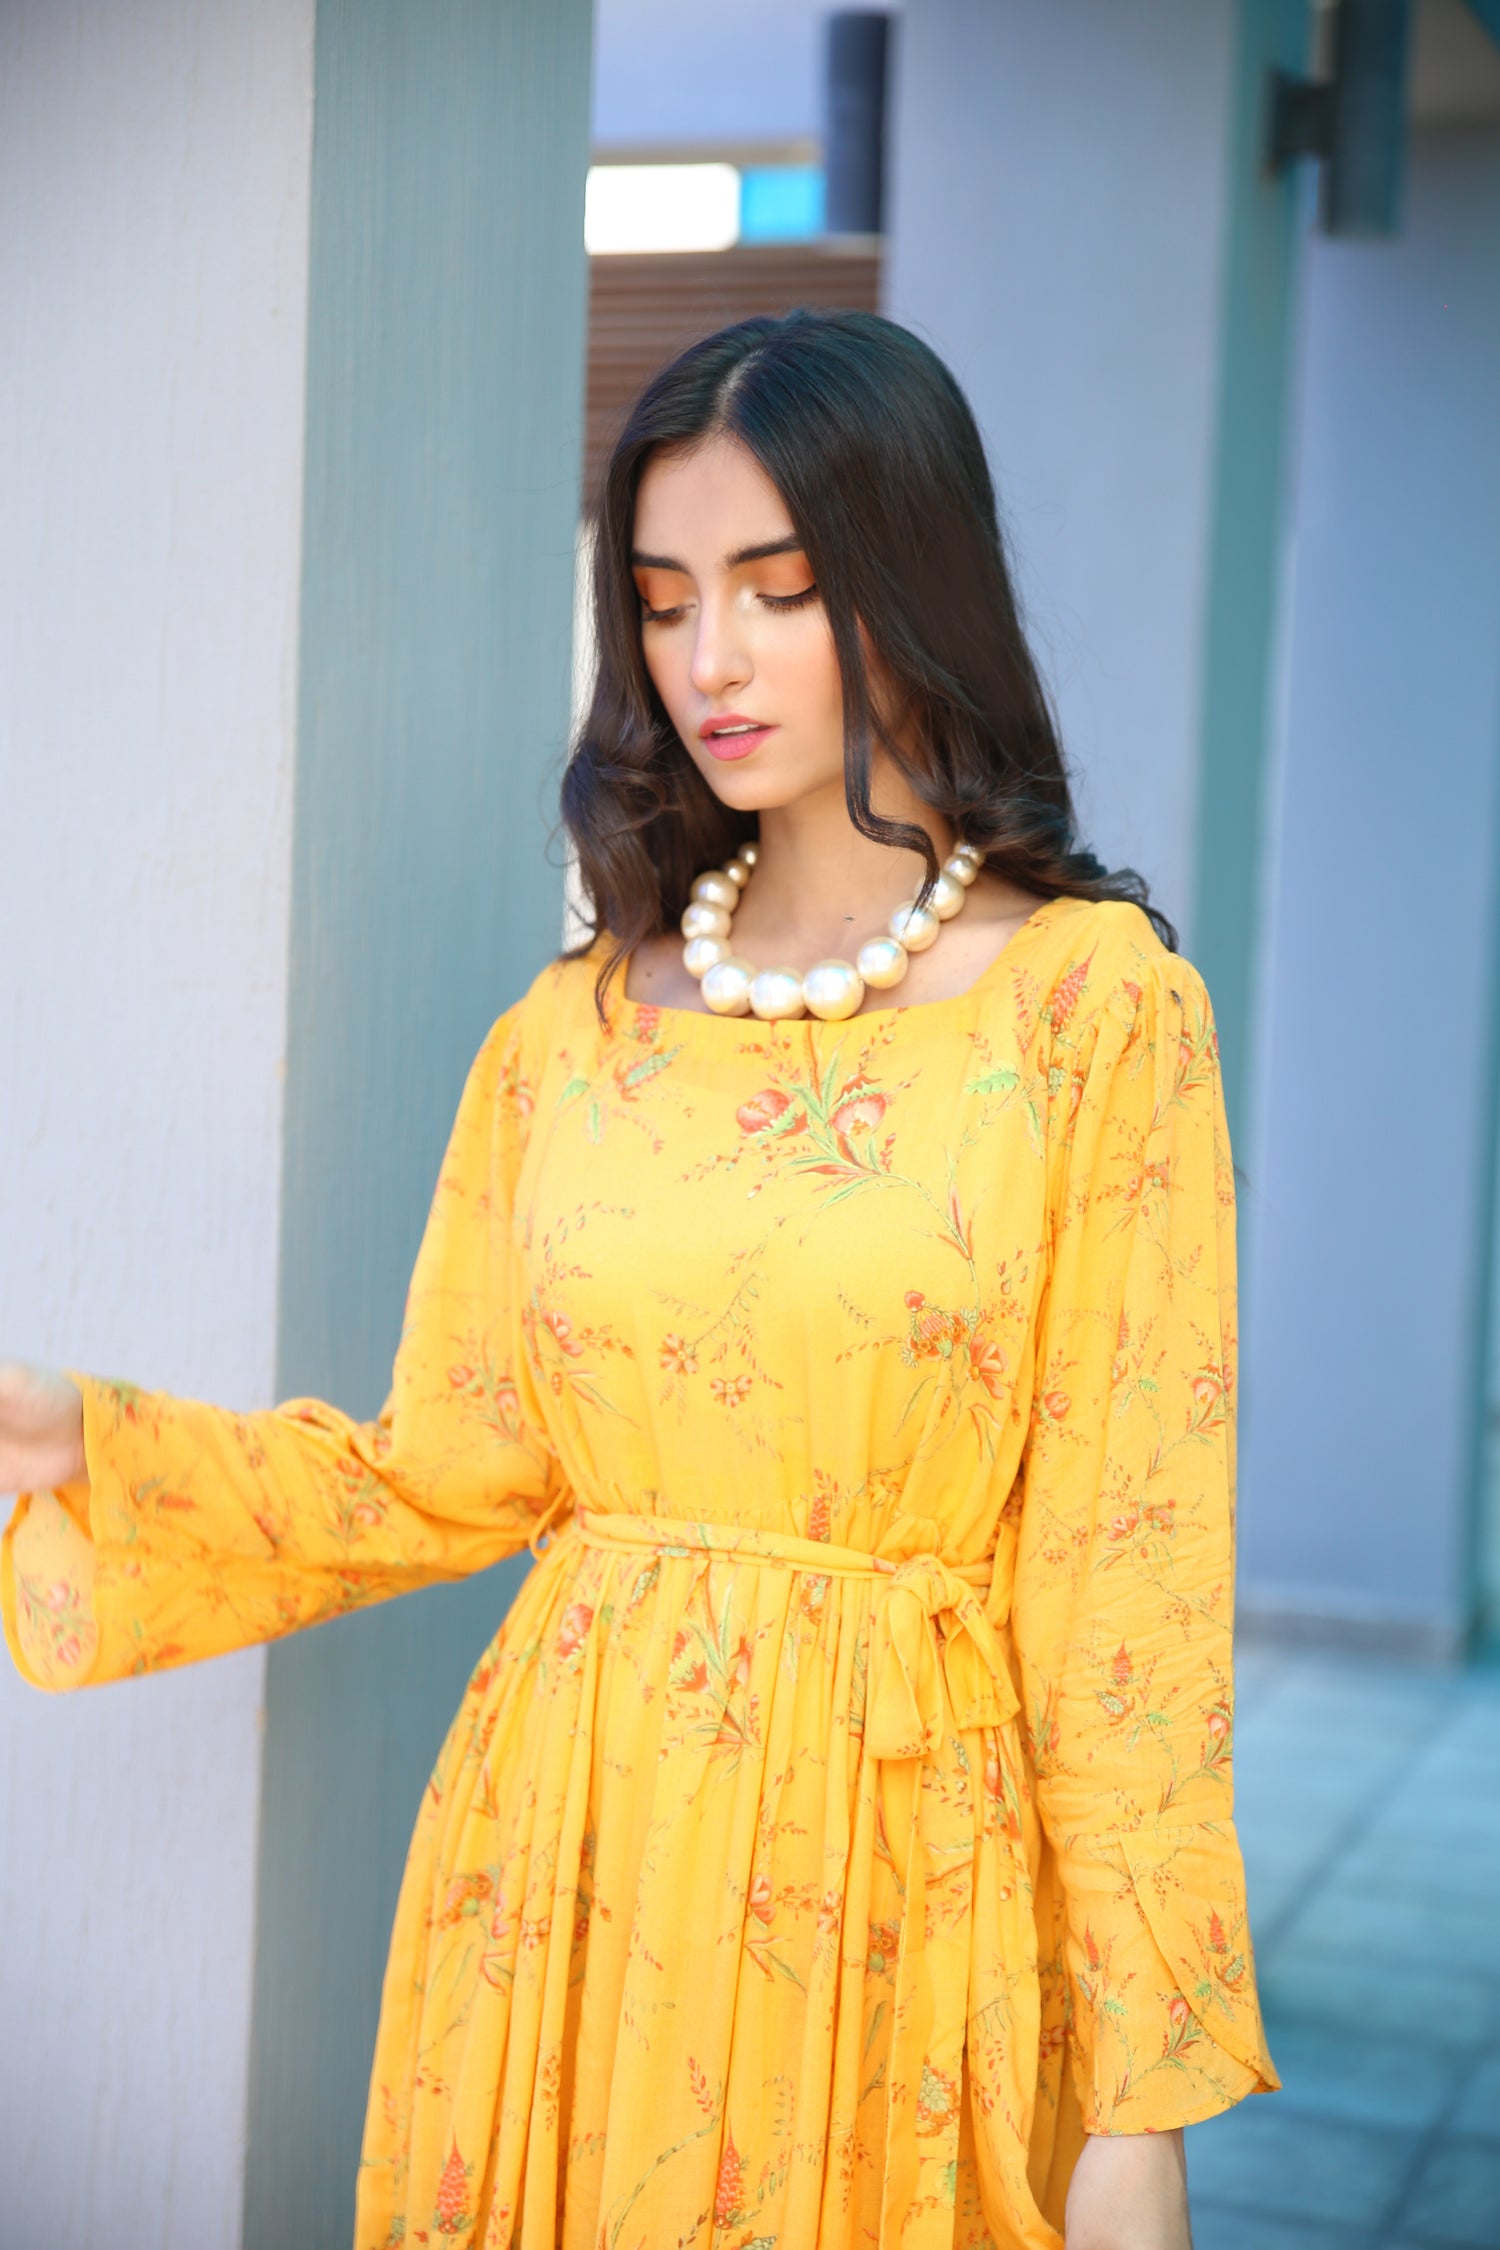 Floral Yellow Summer Maxi